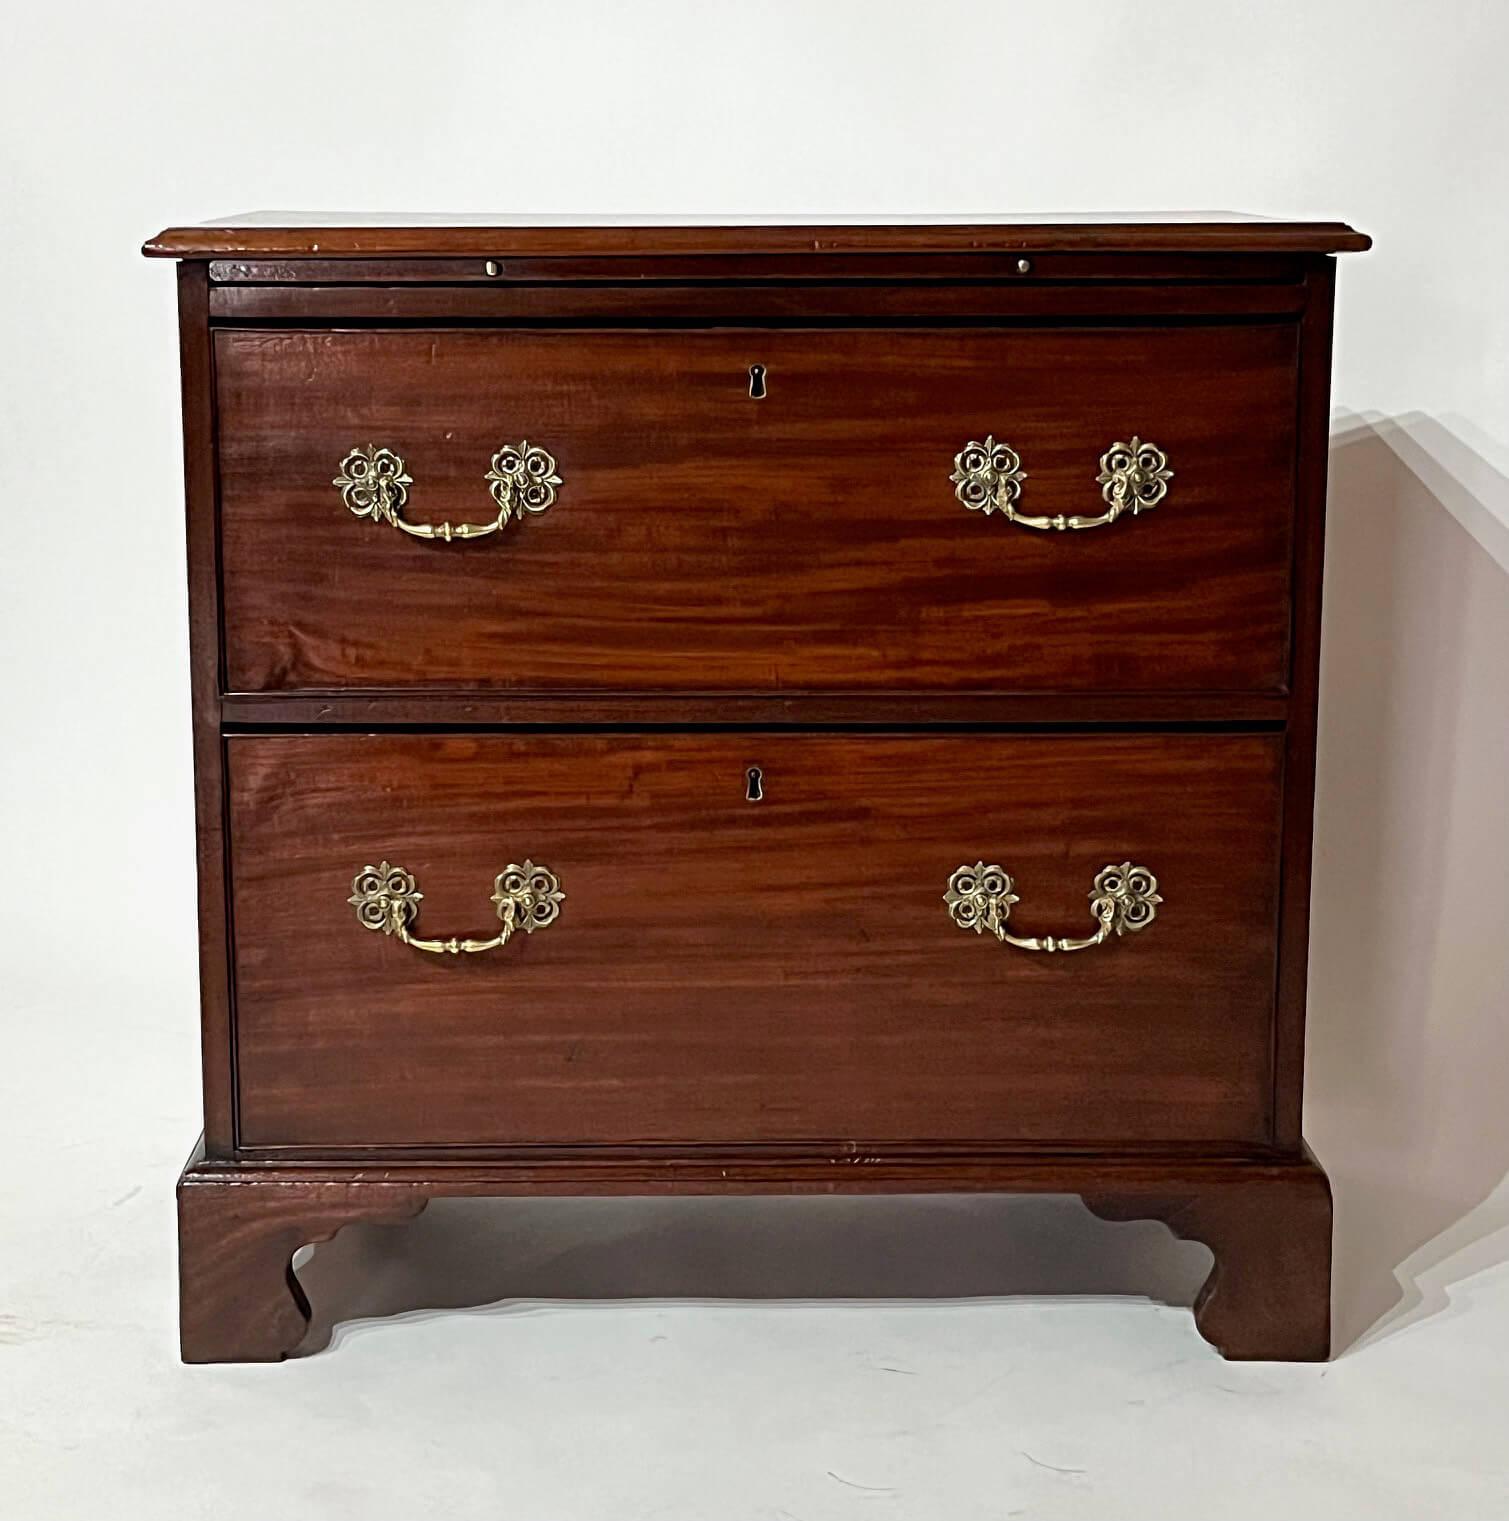 A fine English circa 1760, late George II, early George III period bachelor's chest of rare 'hat chest' or 'bonnet chest' configuration, the luminescent mahogany case of rectangular form having top brushing slide above two deep drawers with